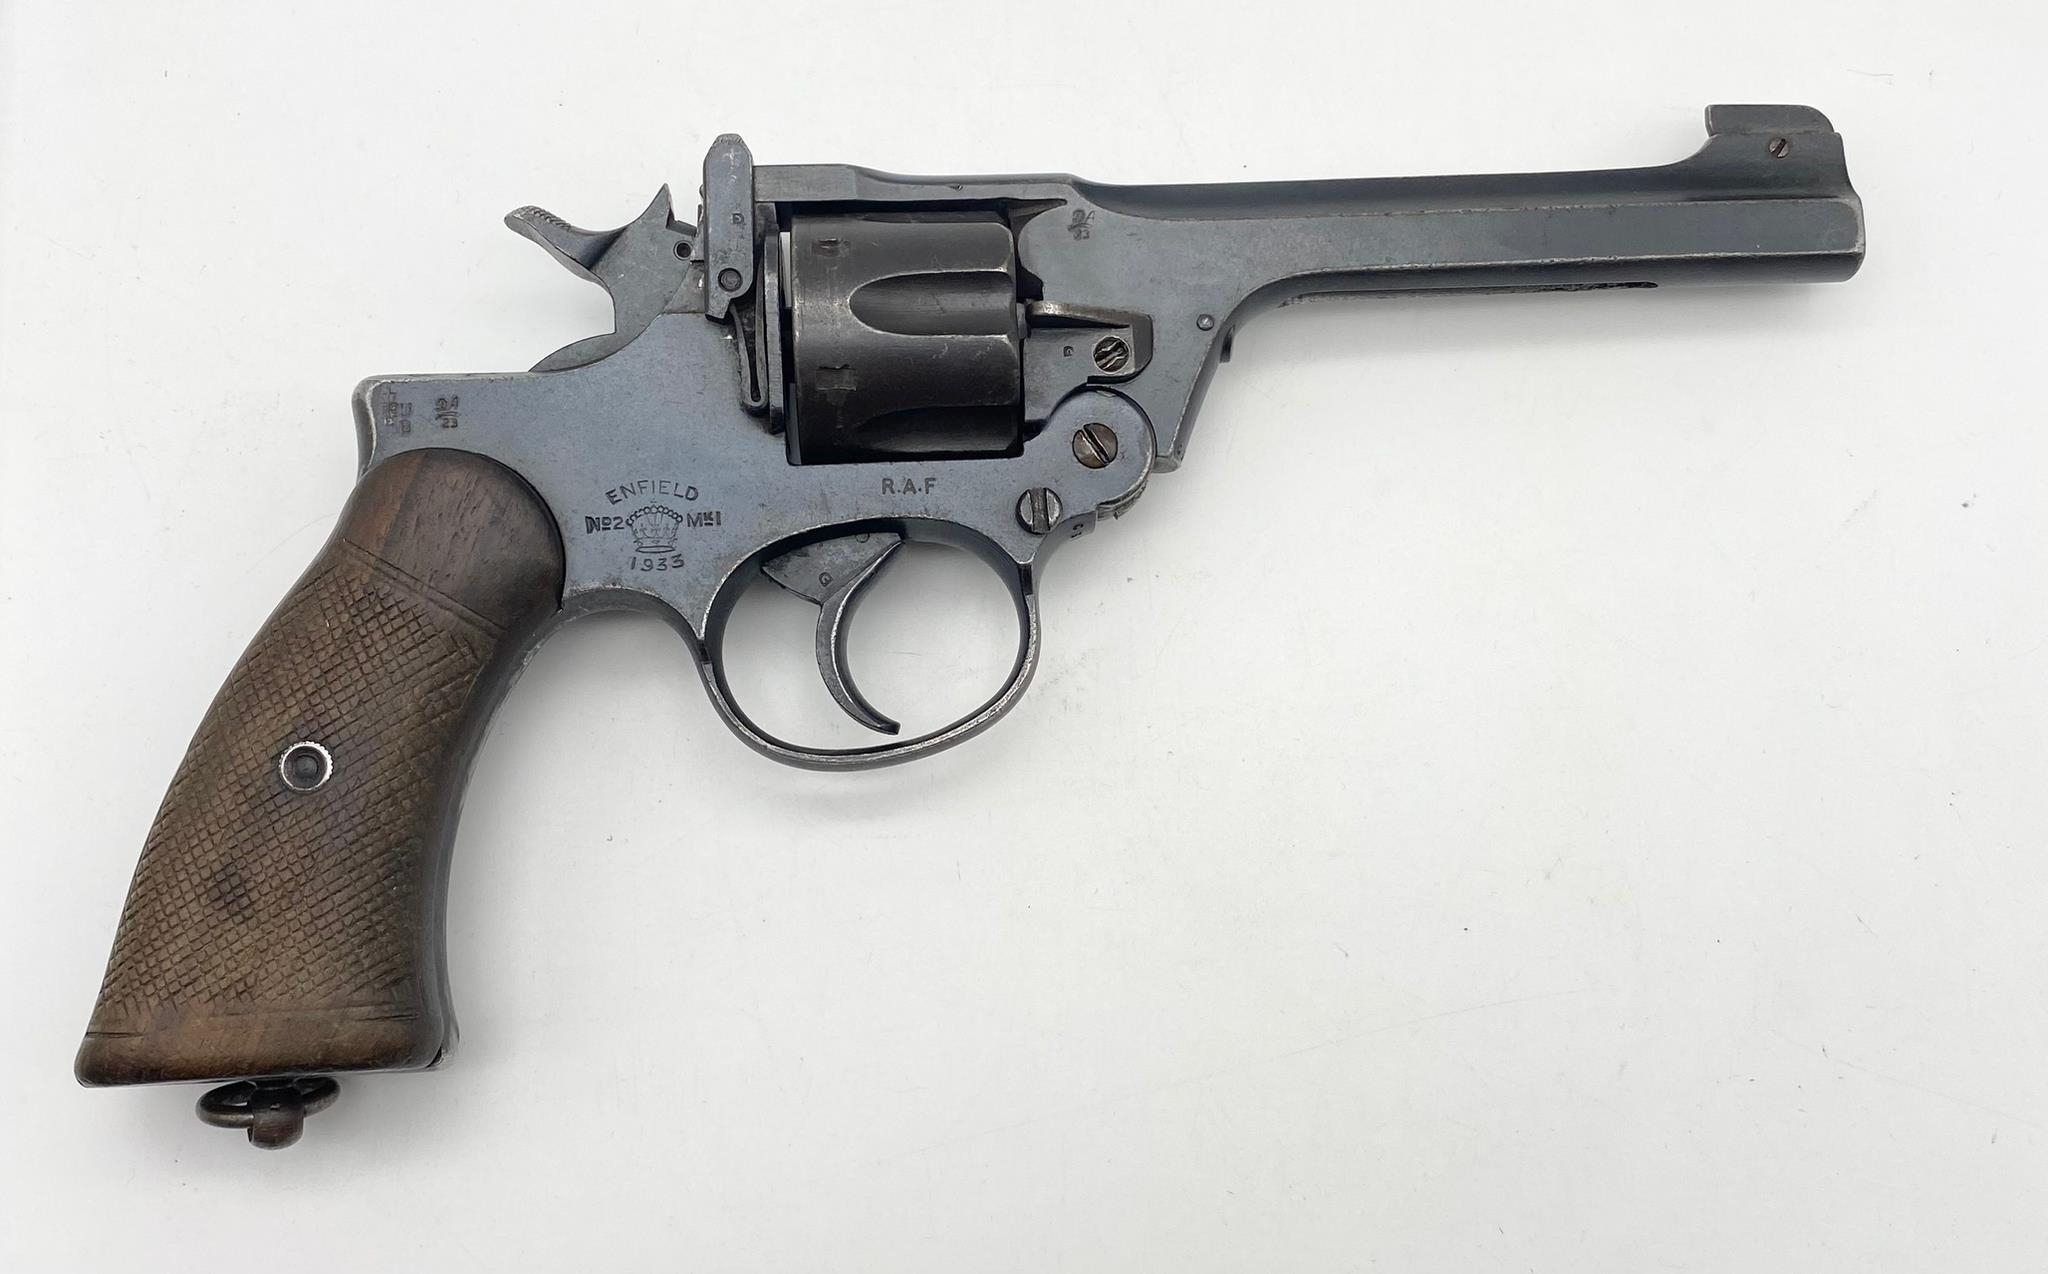 A Deactivated 1933 Enfield No2, Mark 1 Service Revolver Pistol. 38 calibre. RAF and makers marks